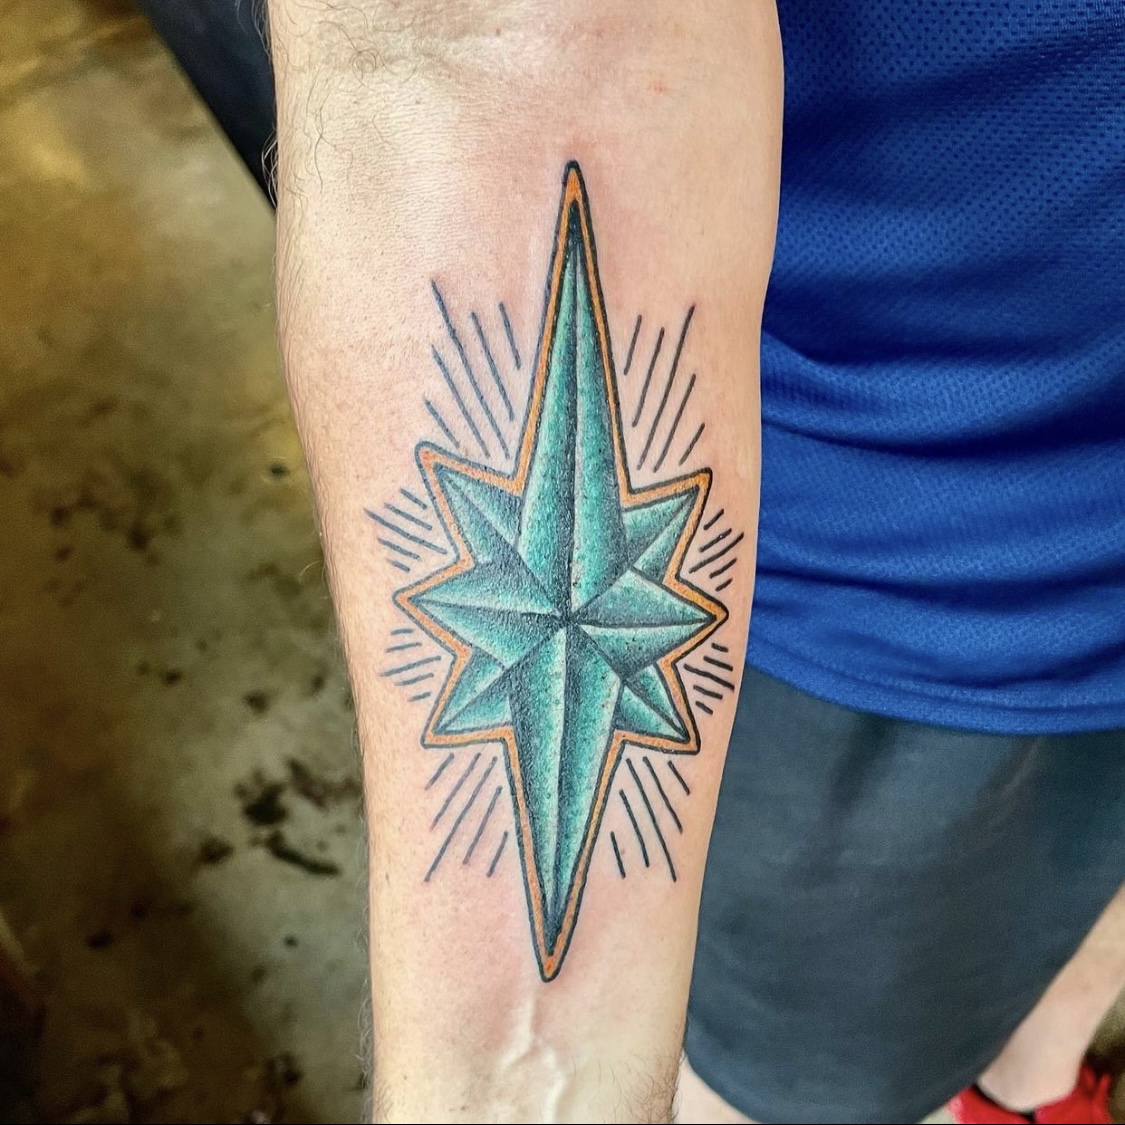 Large tattoo of a green star from best tattoos in dallas